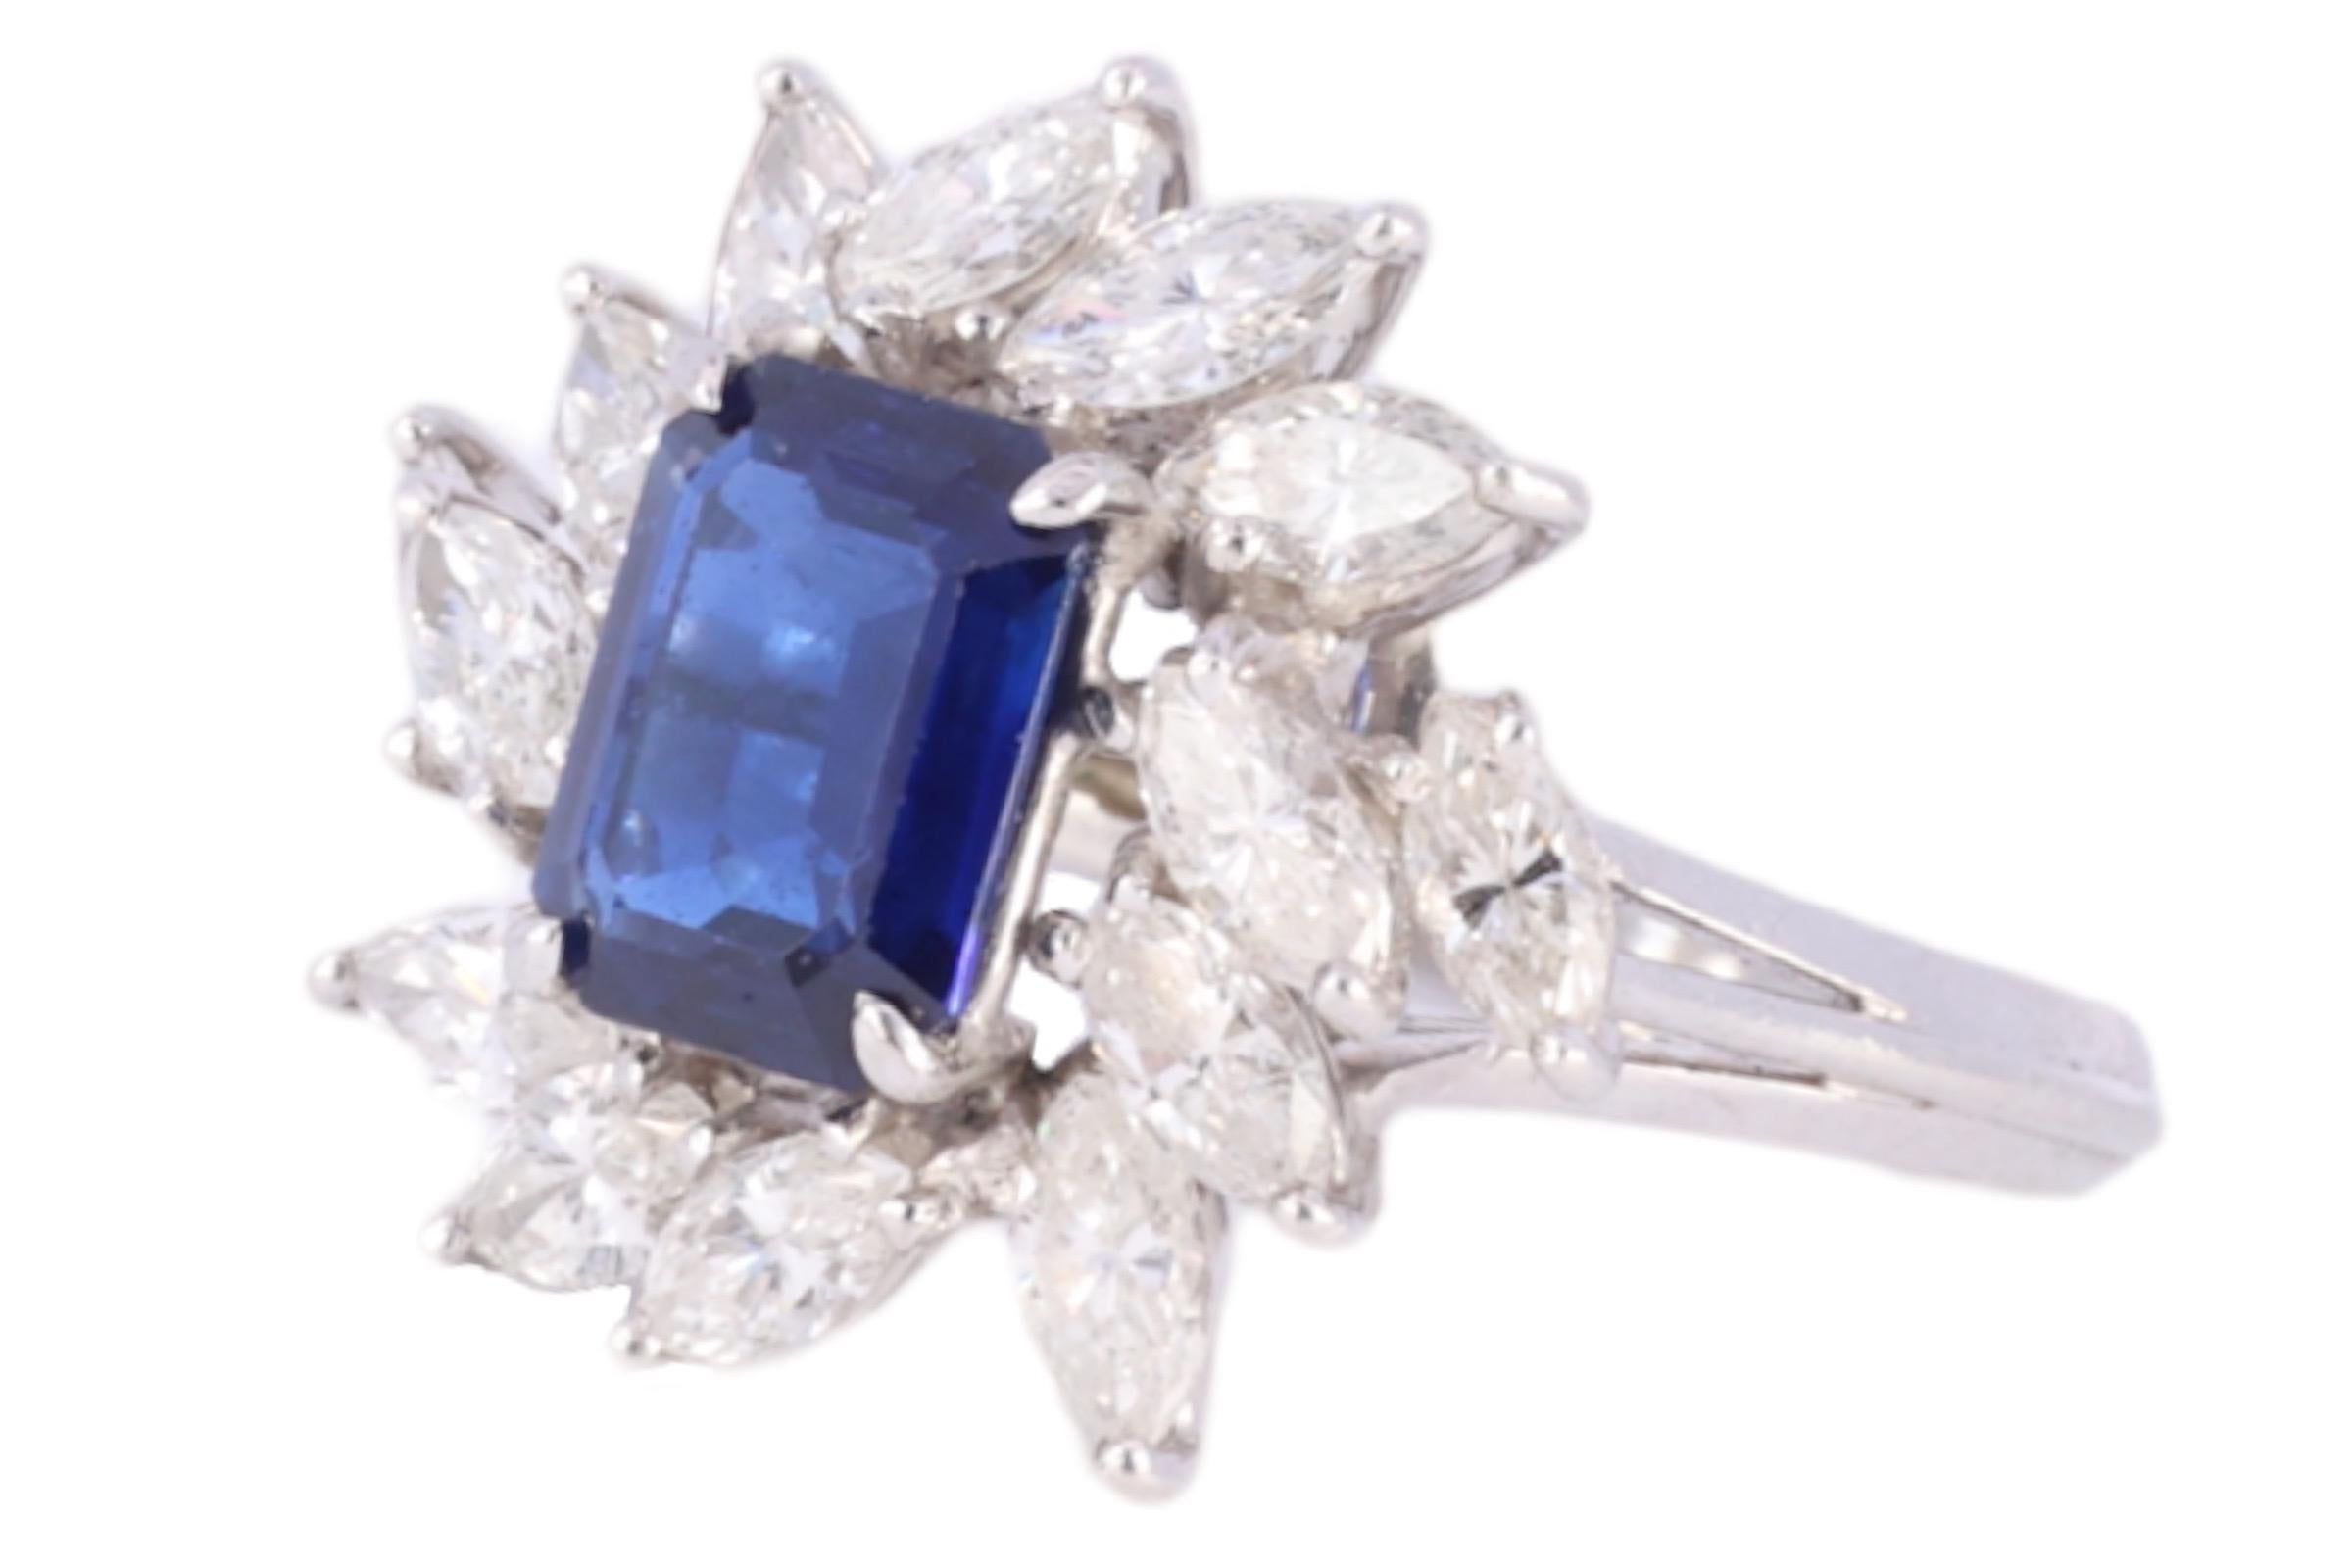 Magnificent Ring With 1.5ct Deep Blue Sapphire, Marquise Diamonds with GRS Certificate from Estate His Majesty Sultan Of Oman Qaboos Bin Said

Sapphire: Octagonal, Deep blue Natural Sapphire 1.5ct, Origin Thailand. No indications of treatment. Comes